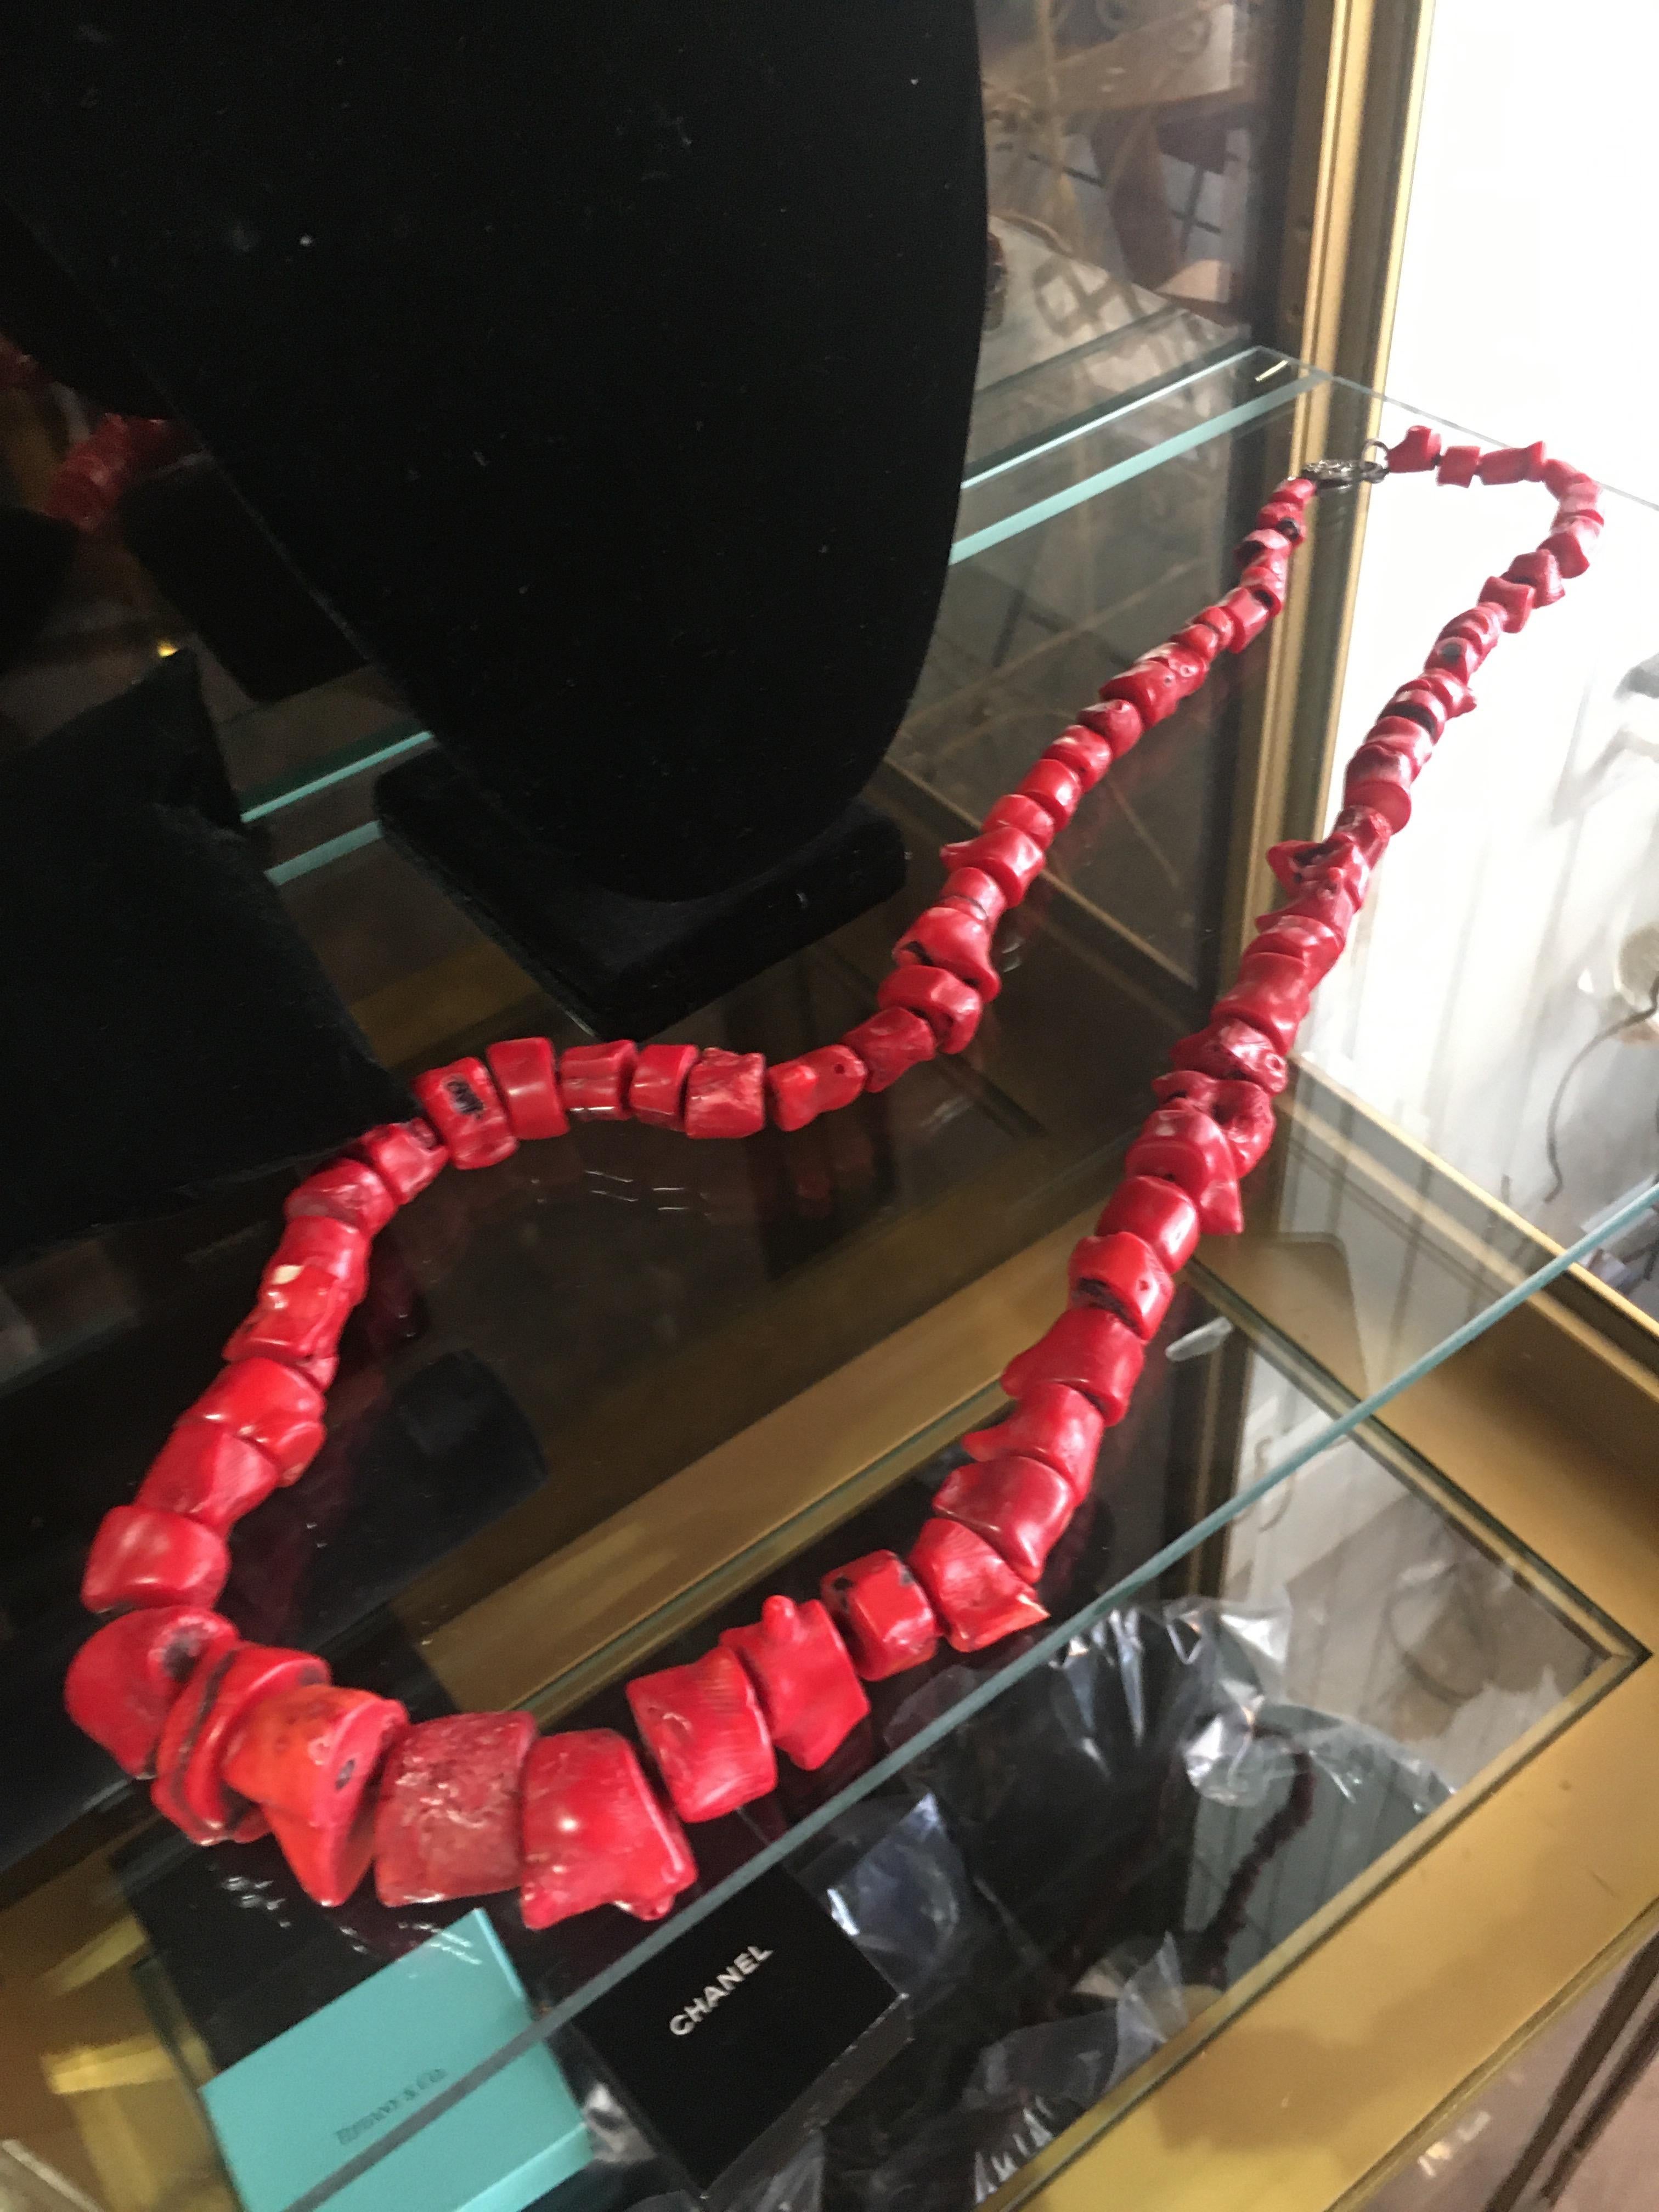 Exquisite Chunky Coral Necklace, Great Color And Proportion.  Perfect For That Iris Apfel Style.  Long Enough To Wrap Twice.